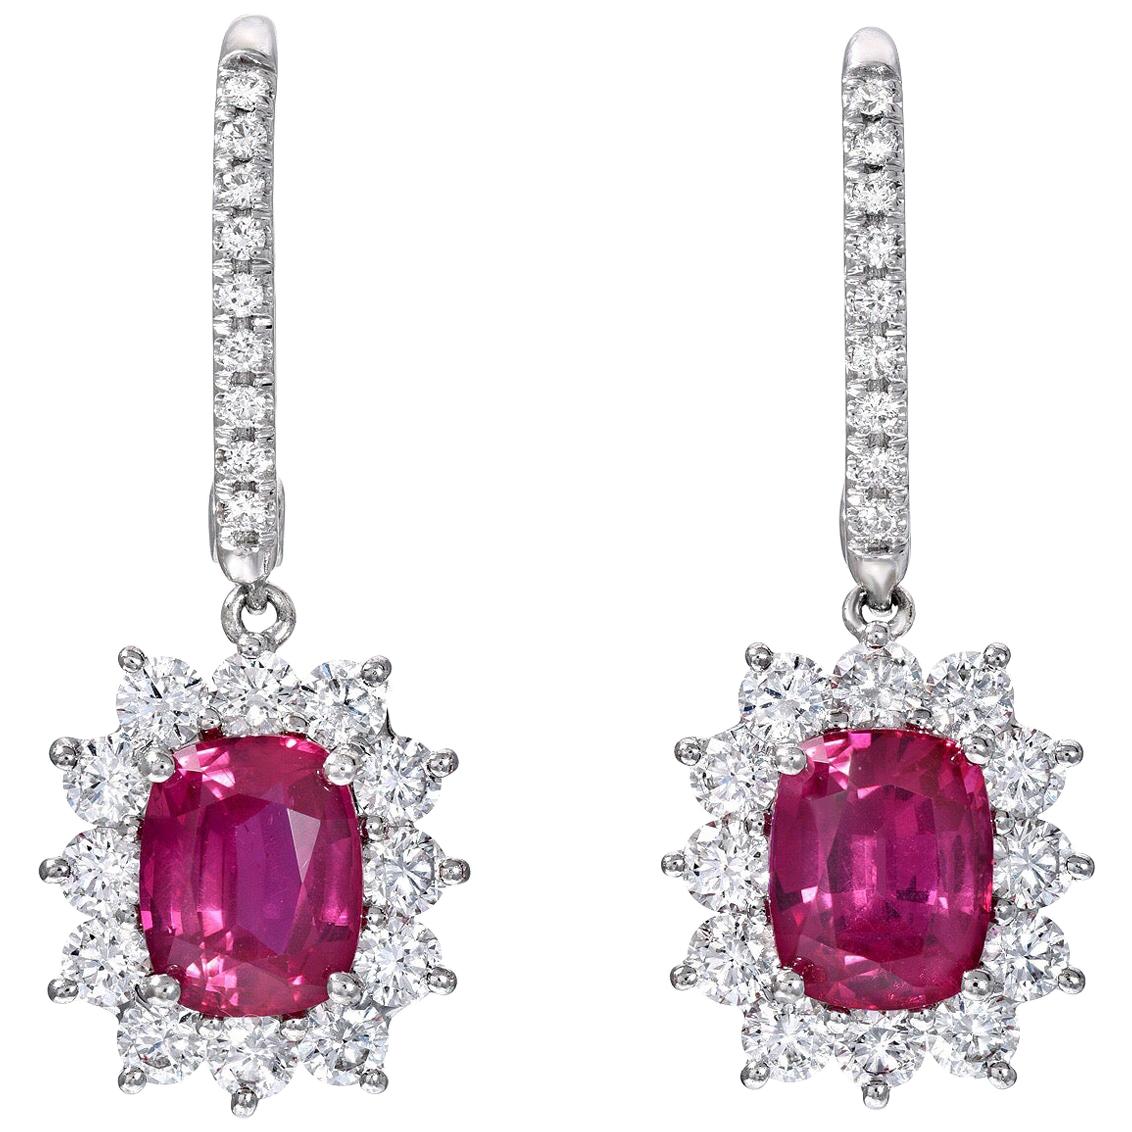 Ruby Earrings CDC Certified 2.84 Carats Vivid Pinkish Red